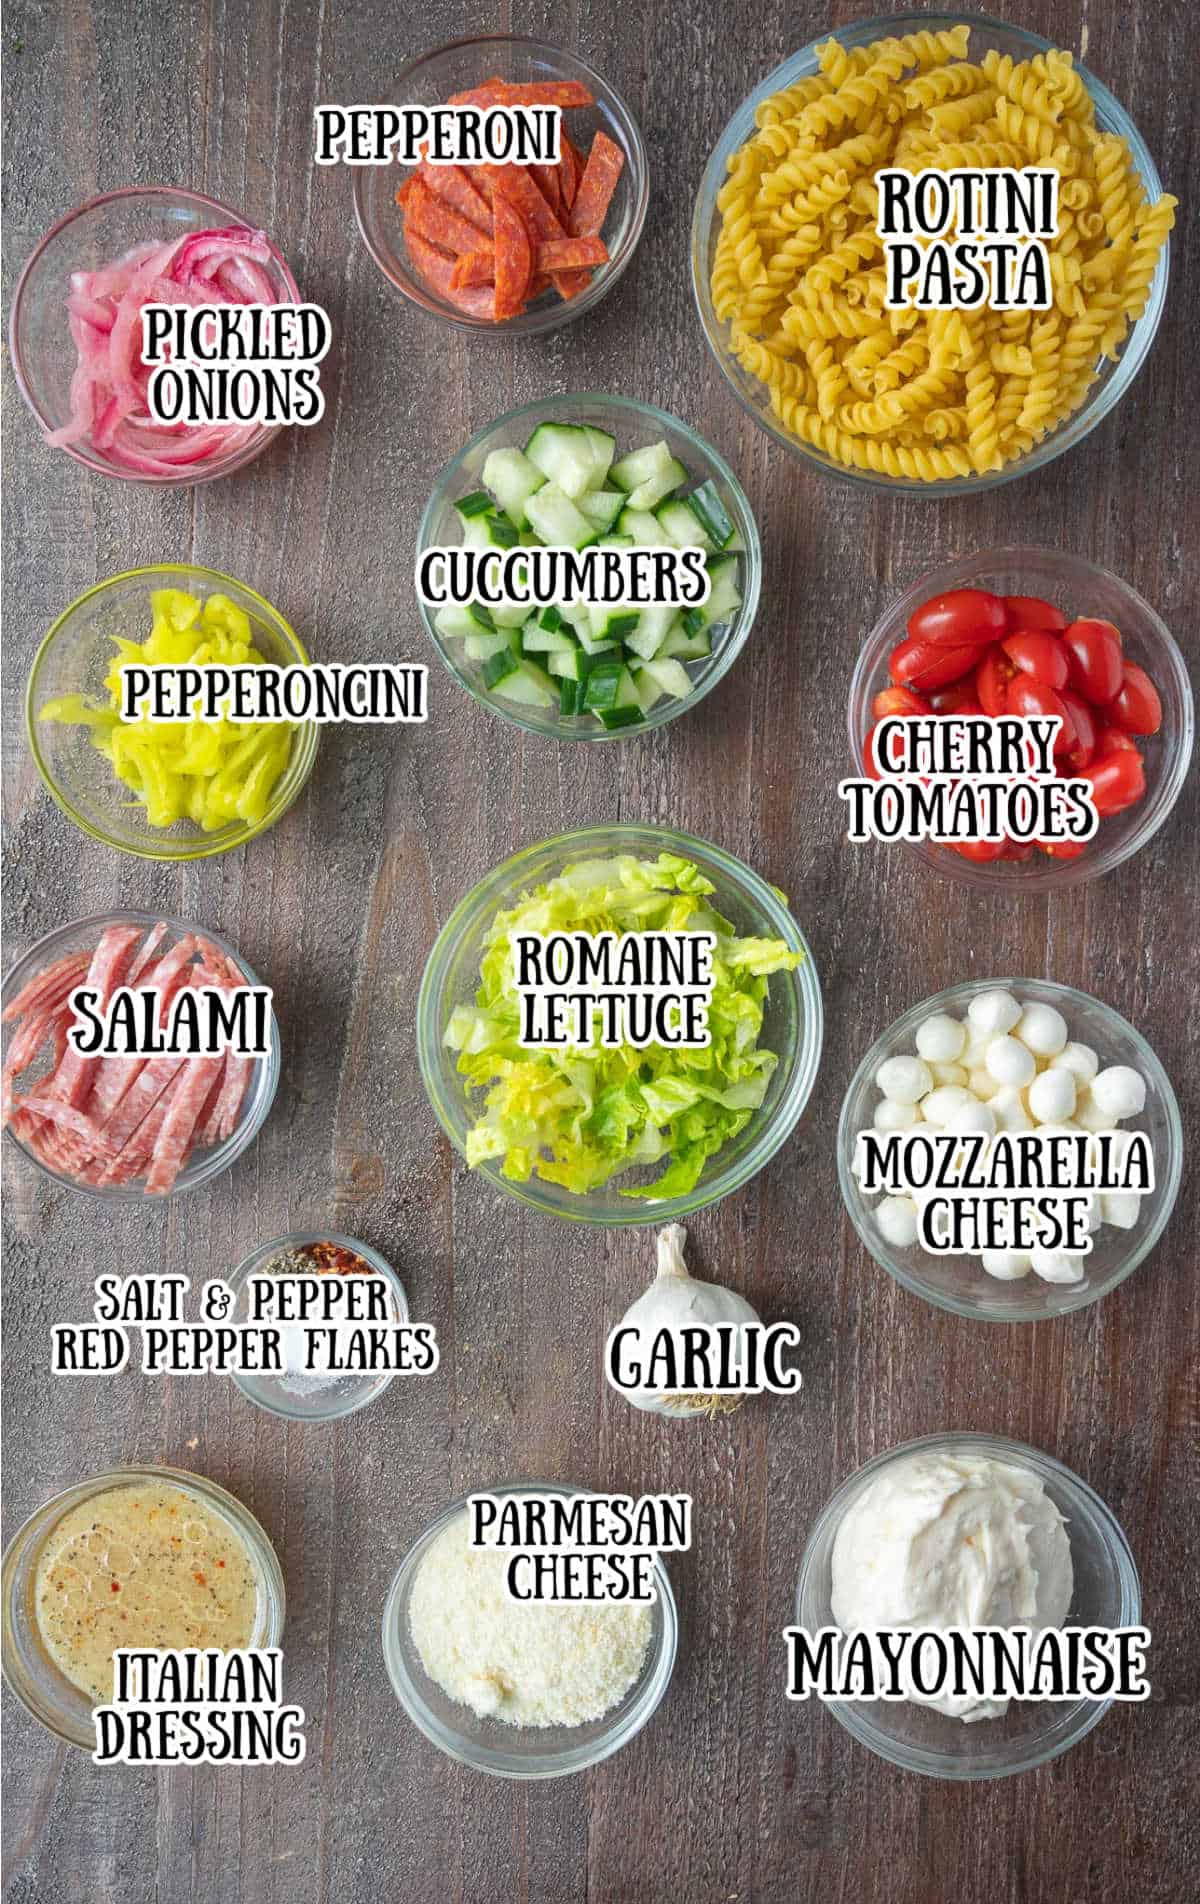 All the ingredients needed for this grinder pasta salad.